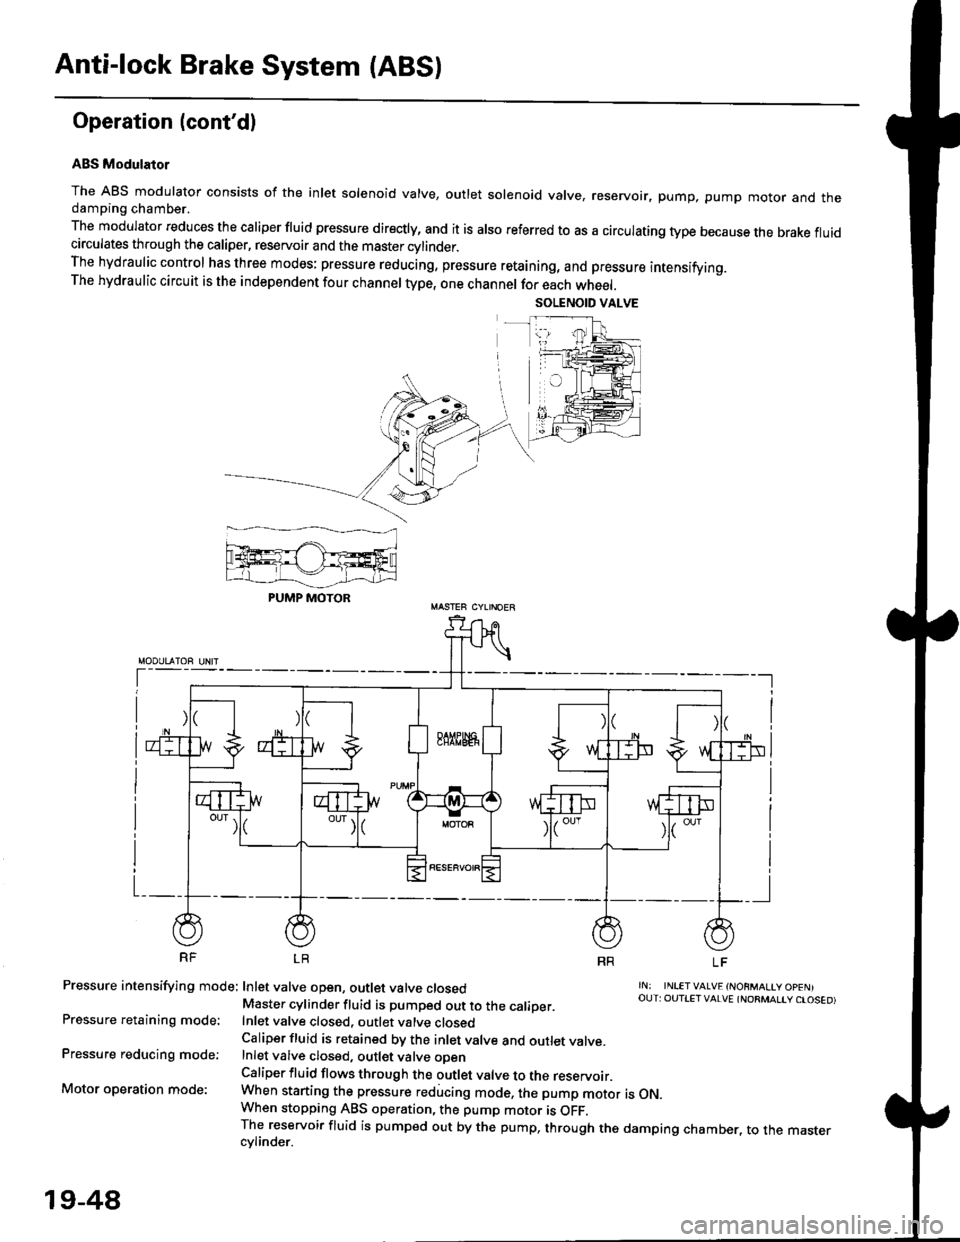 HONDA CIVIC 1997 6.G Owners Guide Anti-lock Brake System {ABS)
Operation (contdl
ABS Modulator
The ABS modulator consists of the inlet solenoid valve, outlet solenoid valve, reservoir, pump, pump motor and thedamping chamber.
The mod